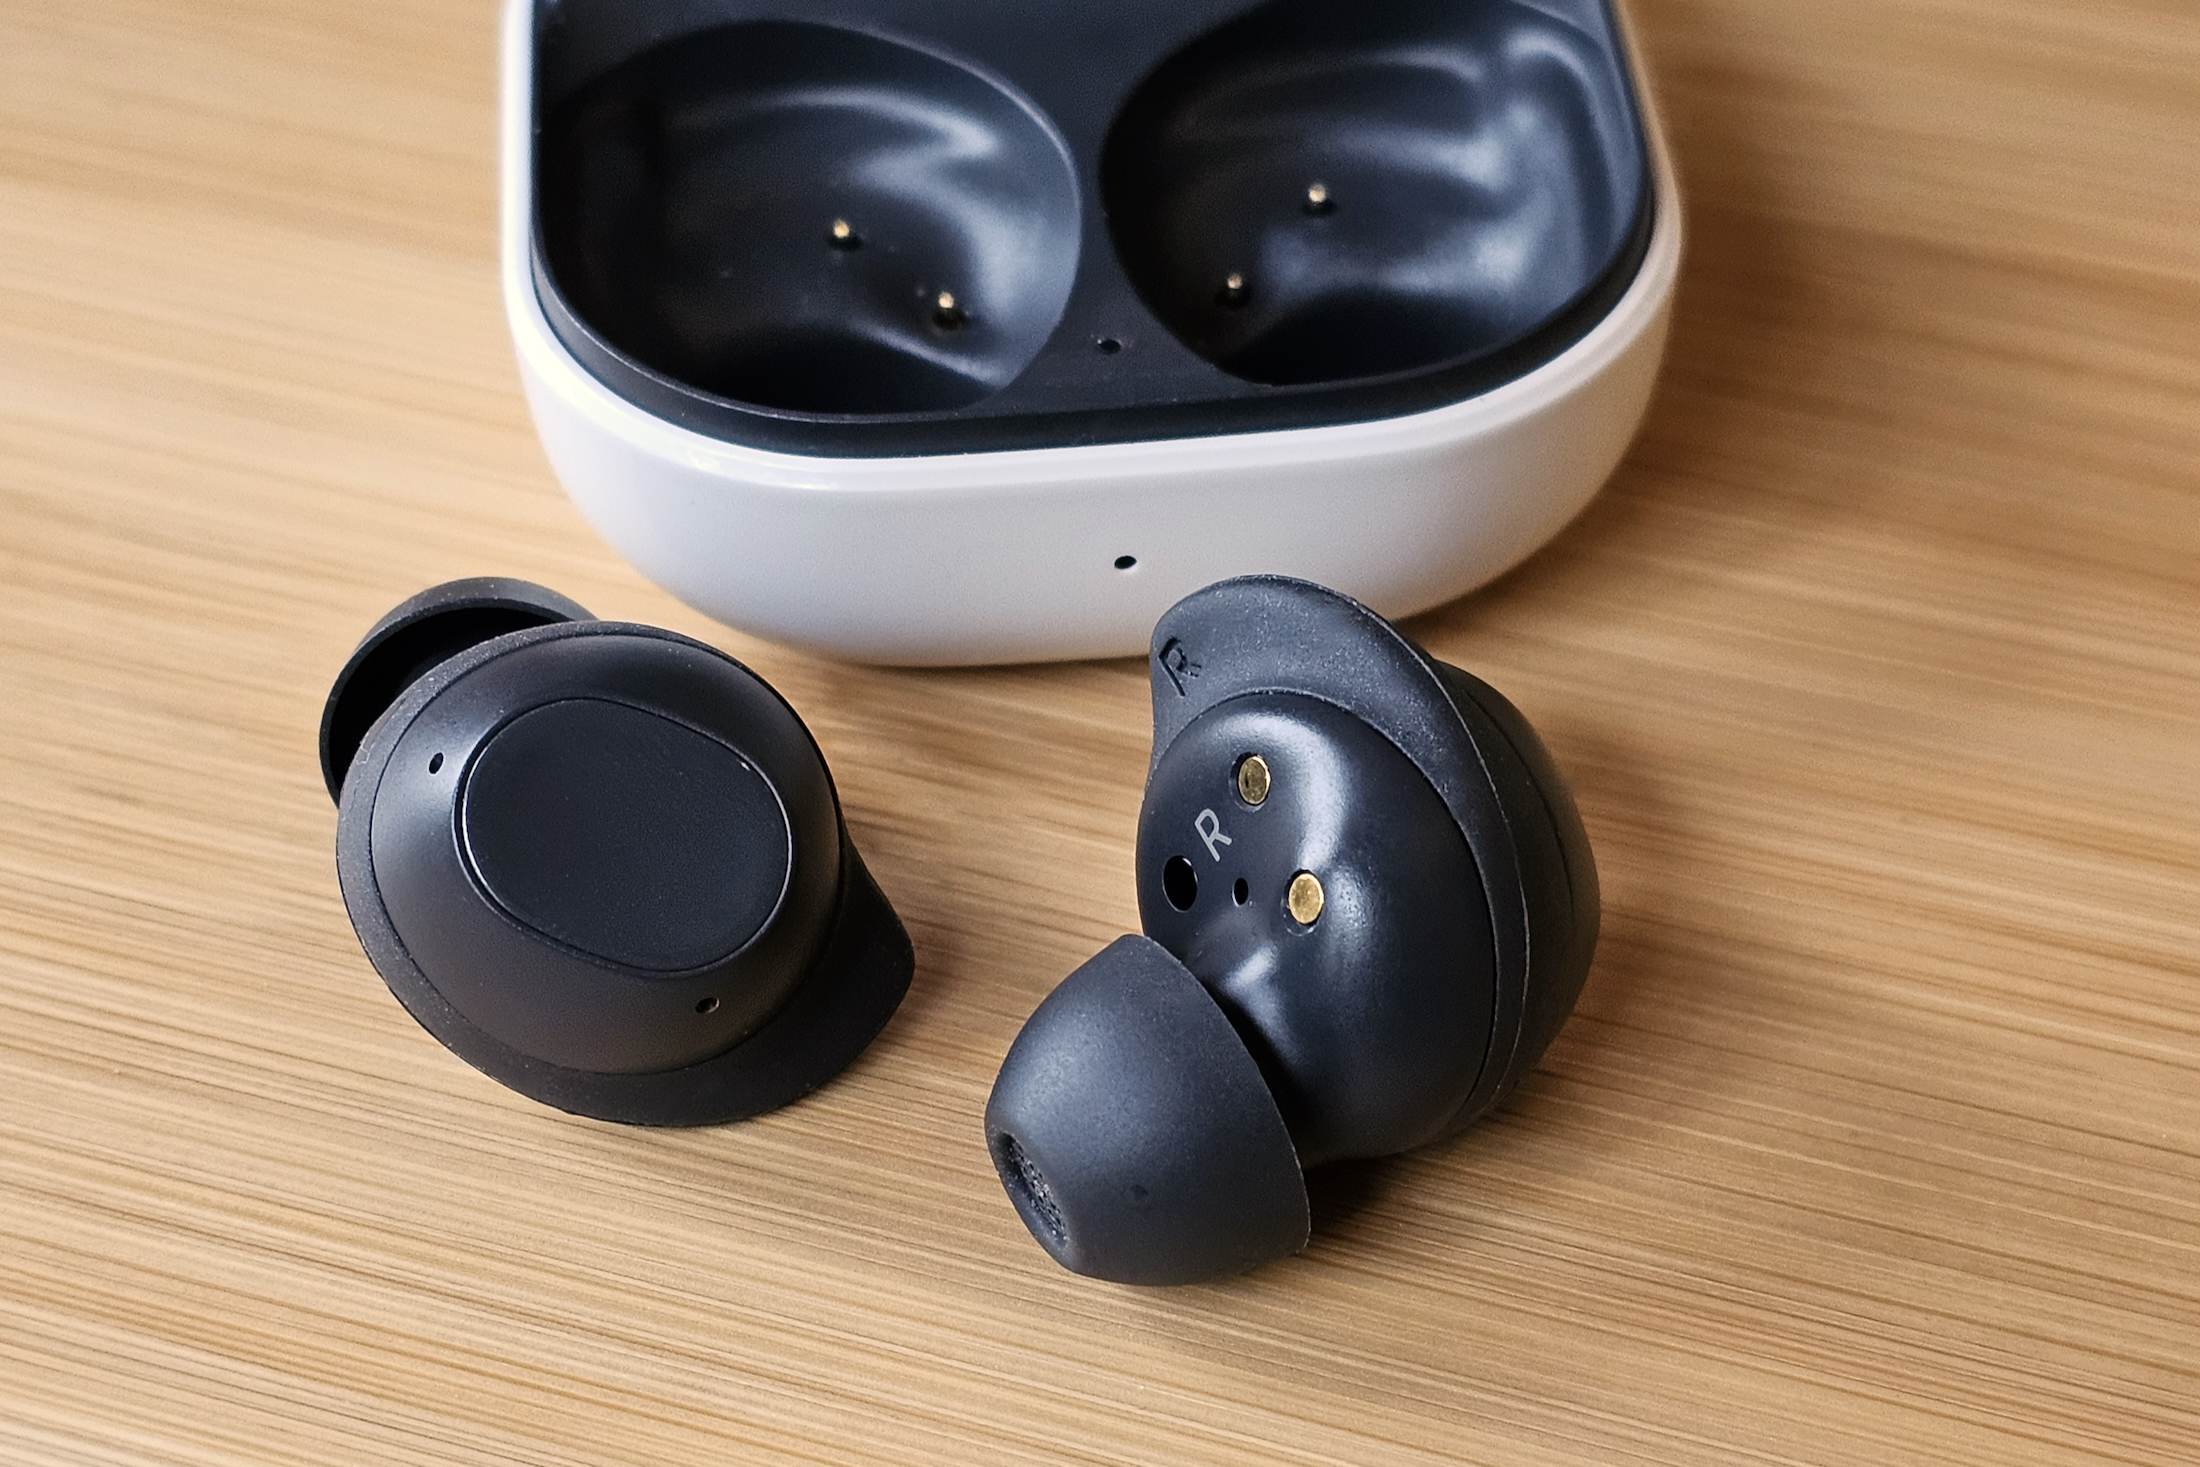 Samsung Galaxy Buds FE review: Great ANC and app but limited to